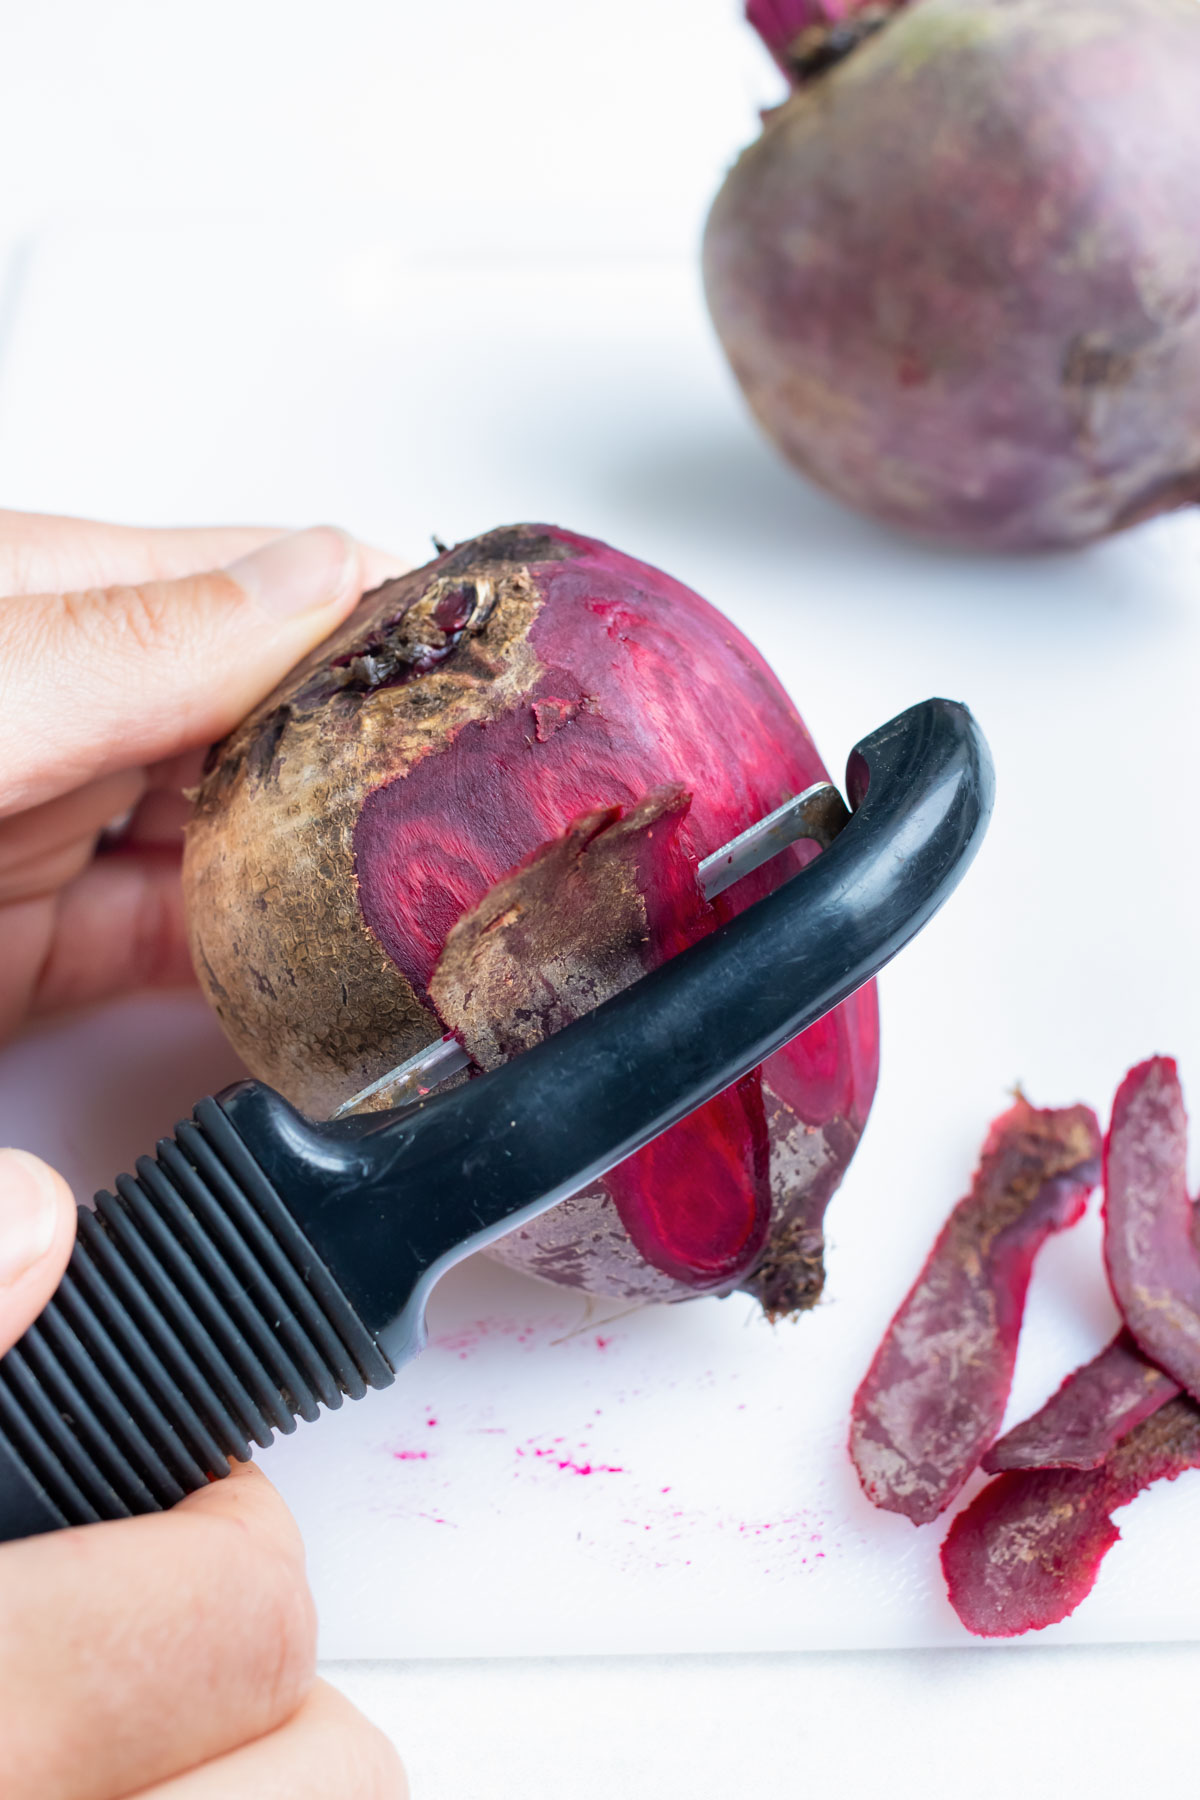 Whole beets are peeled with a vegetable peeler before being roasted for this vegan hummus recipe.